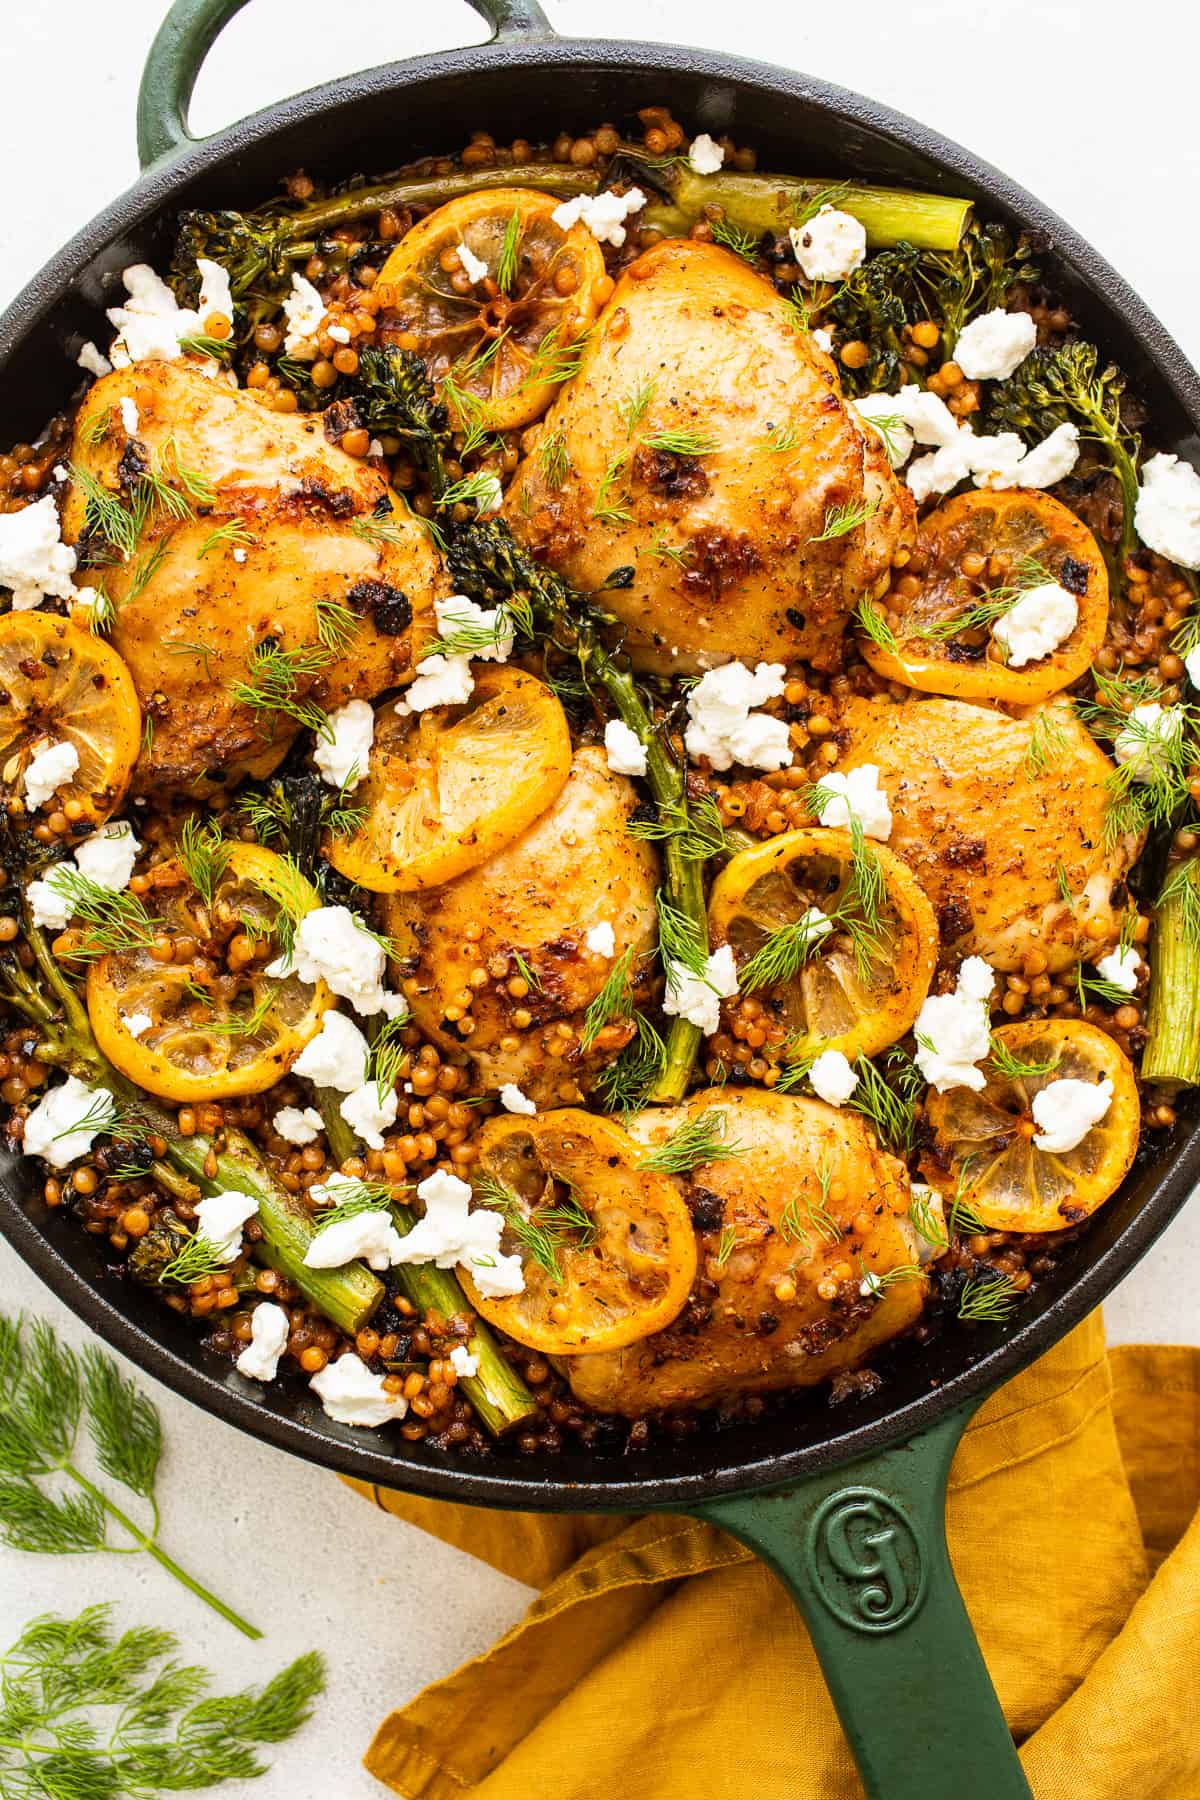 Lemon chicken skillet topped with goat cheese.